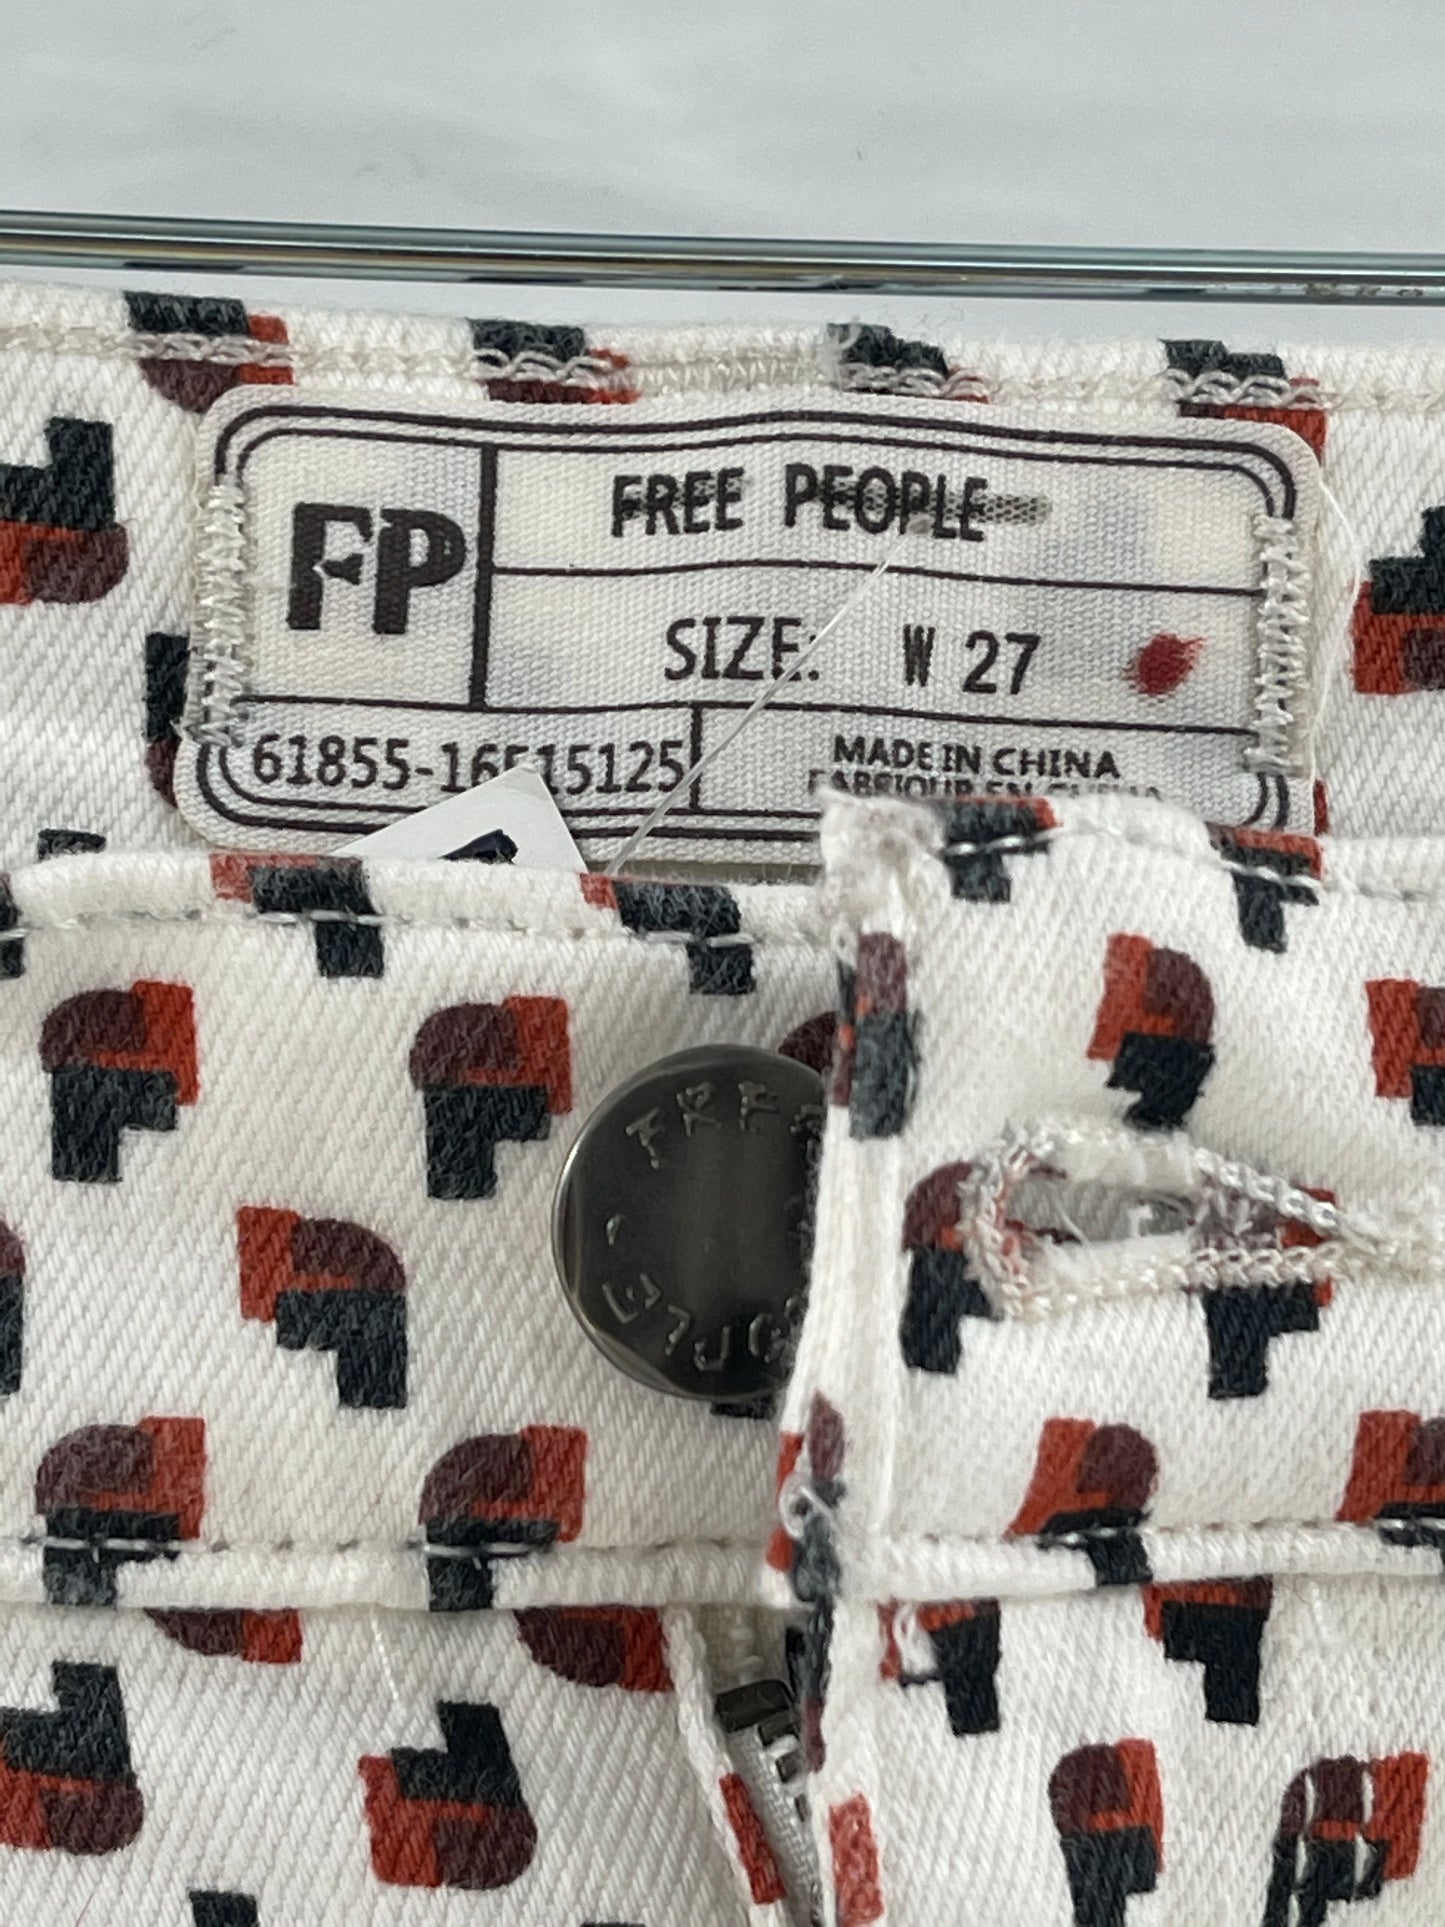 Free People Patterned Graphic Pants (Size W 27)